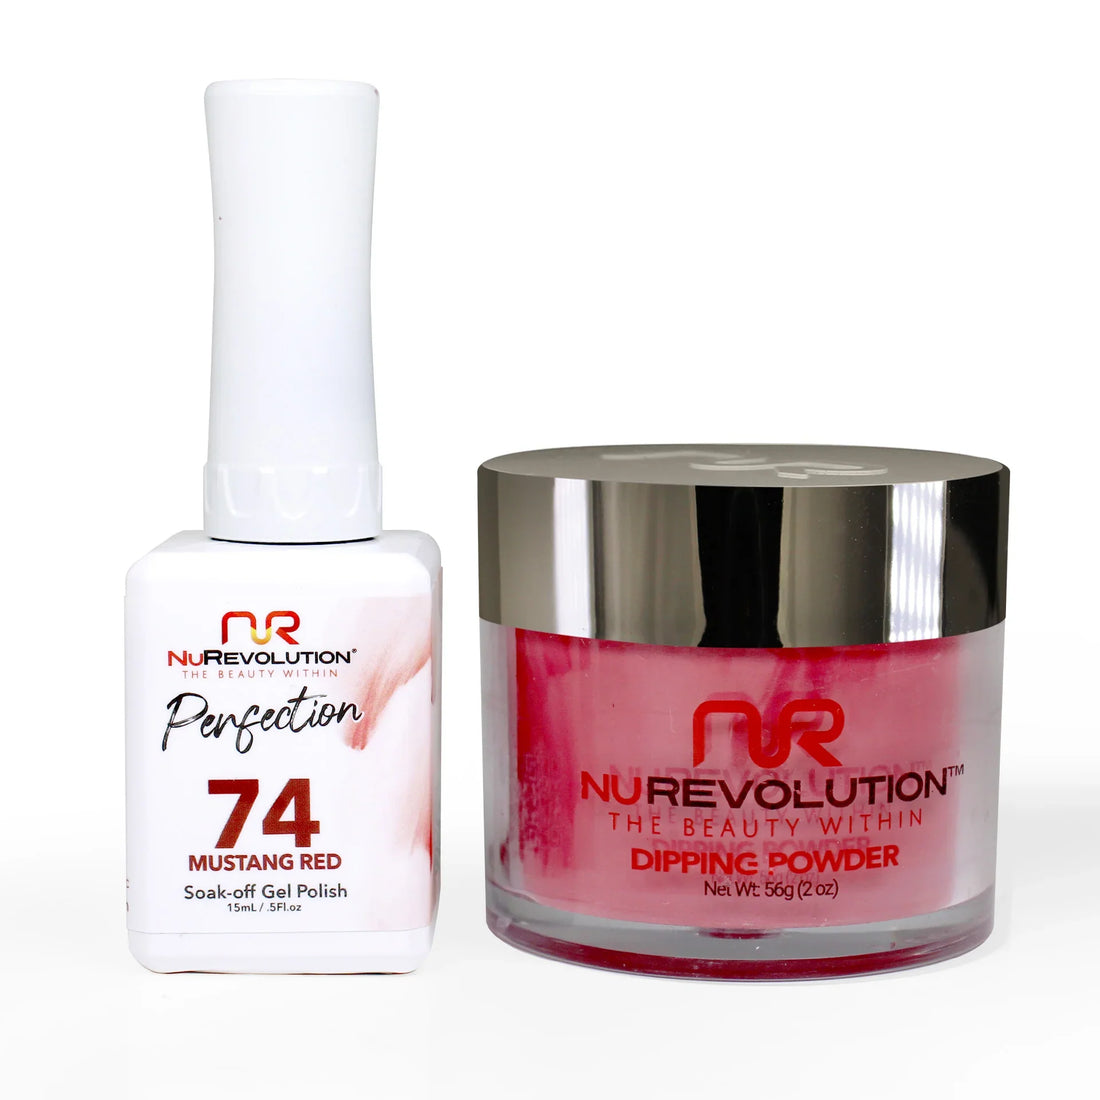 NuRevolution Perfection 074 Mustang Red